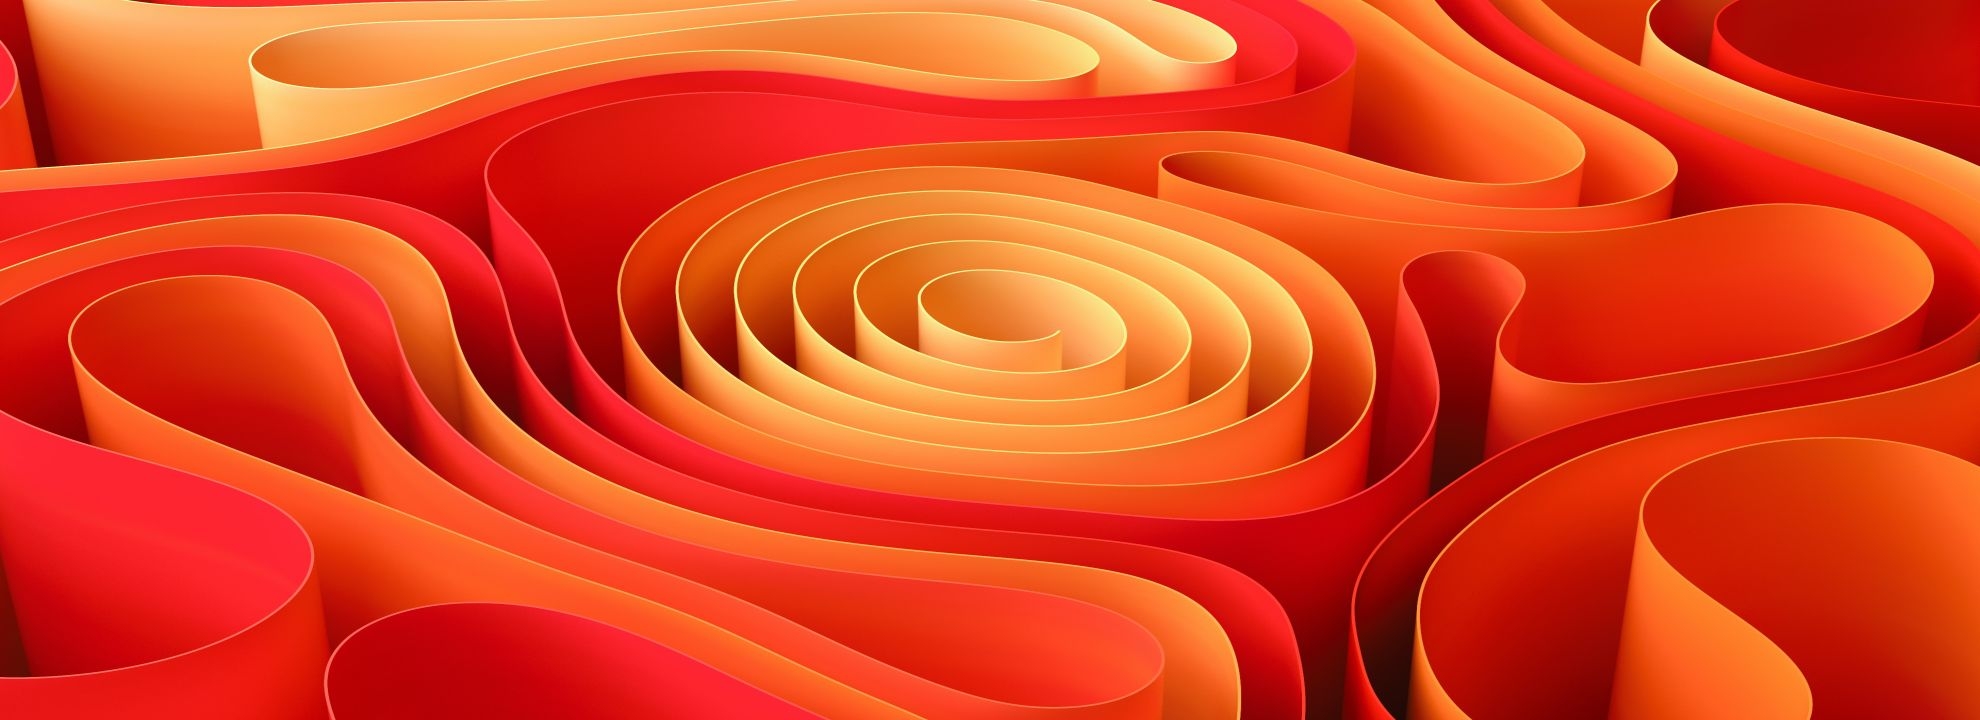 cover image featuring orange glowing ribbons spiraling around each other.